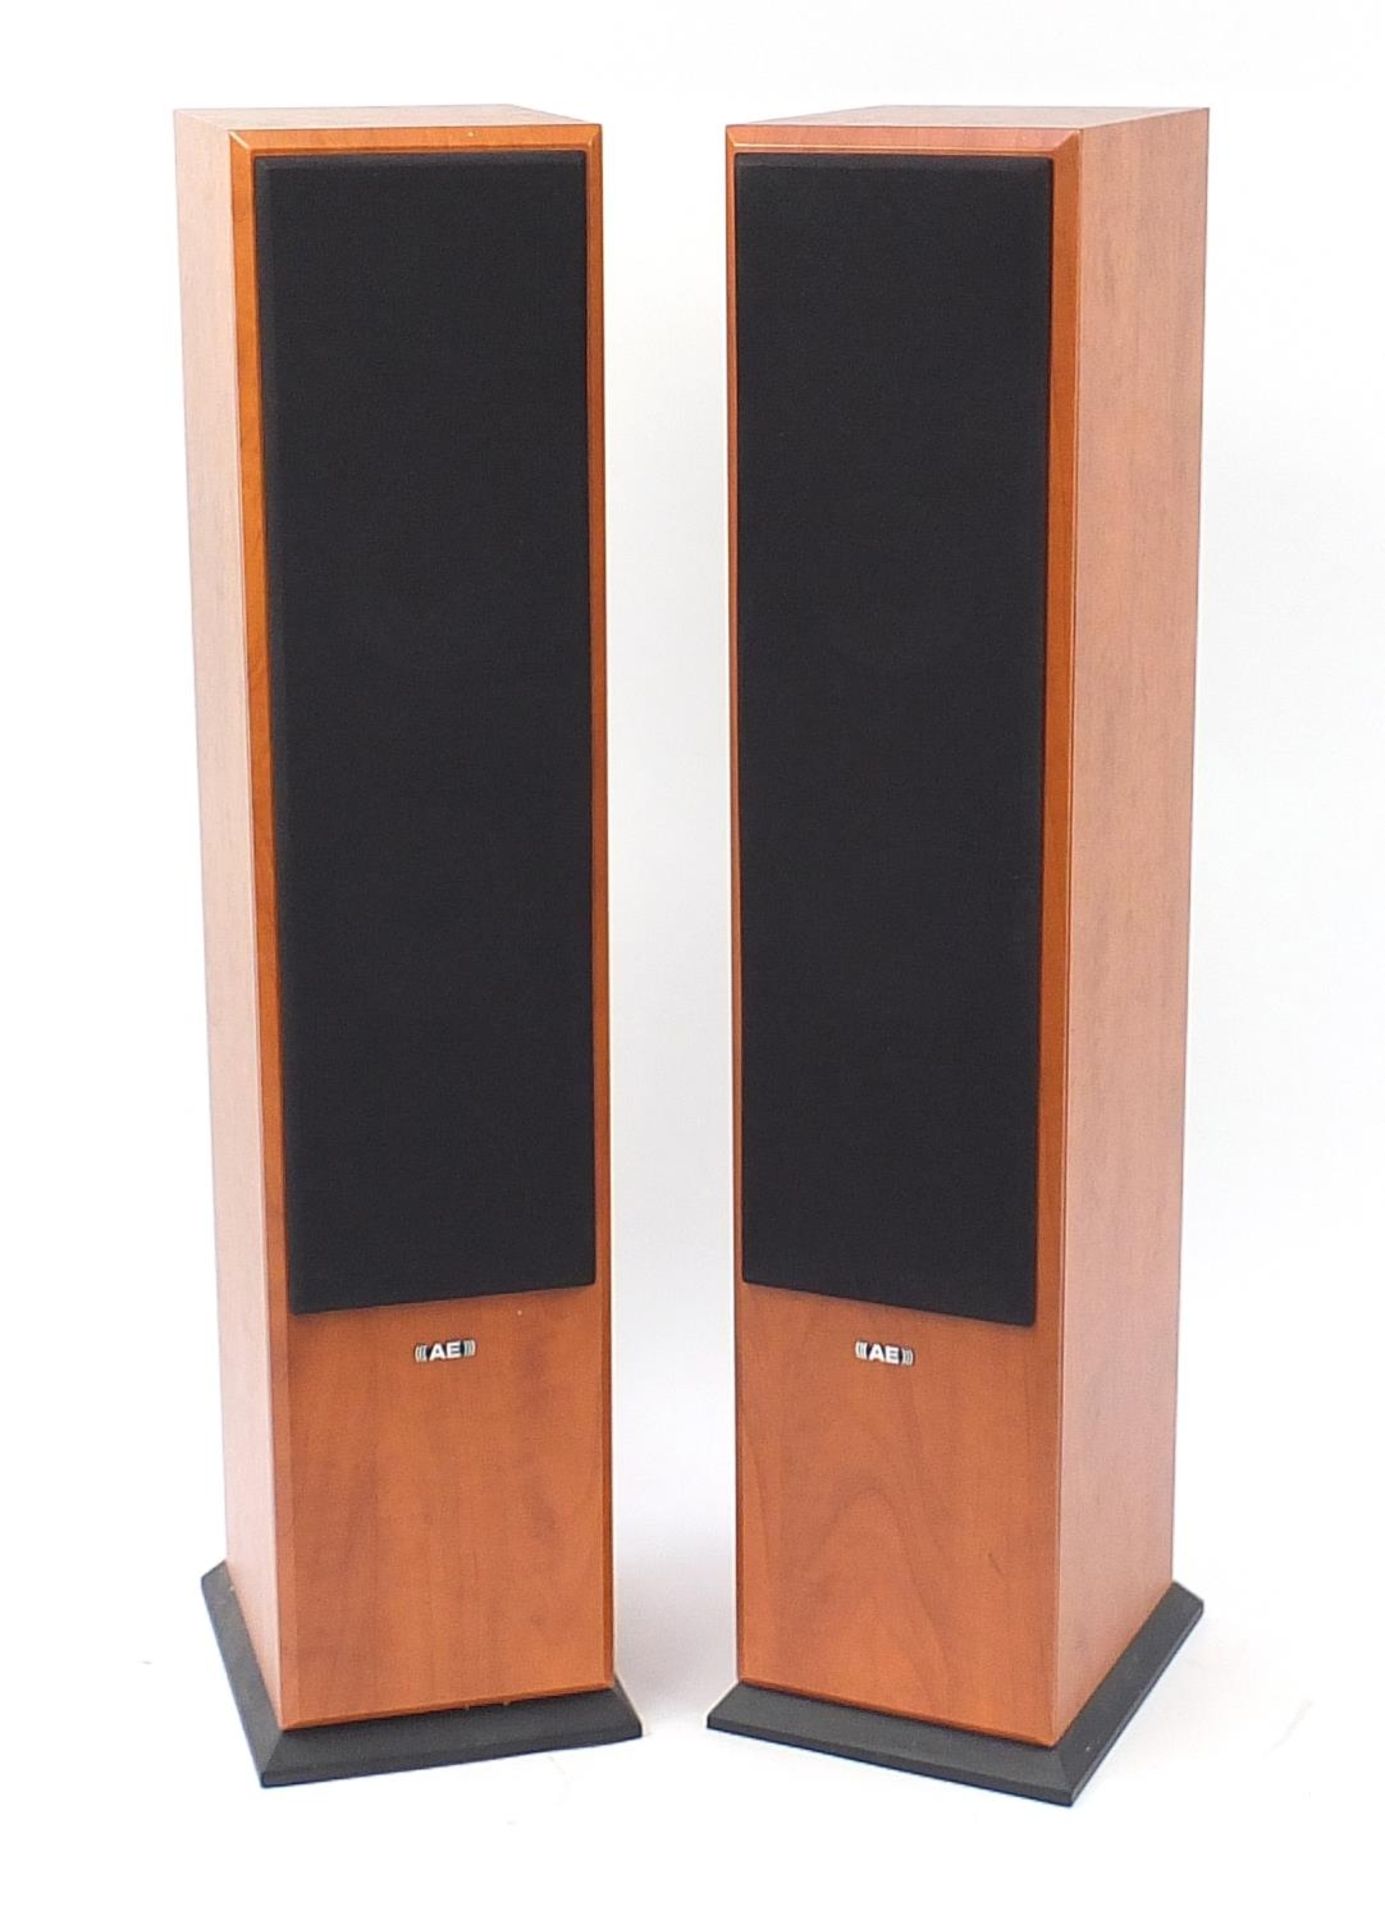 Aegis Evo Three, pair of floor standing speakers, serial number A50500103, 91cm high :For Further